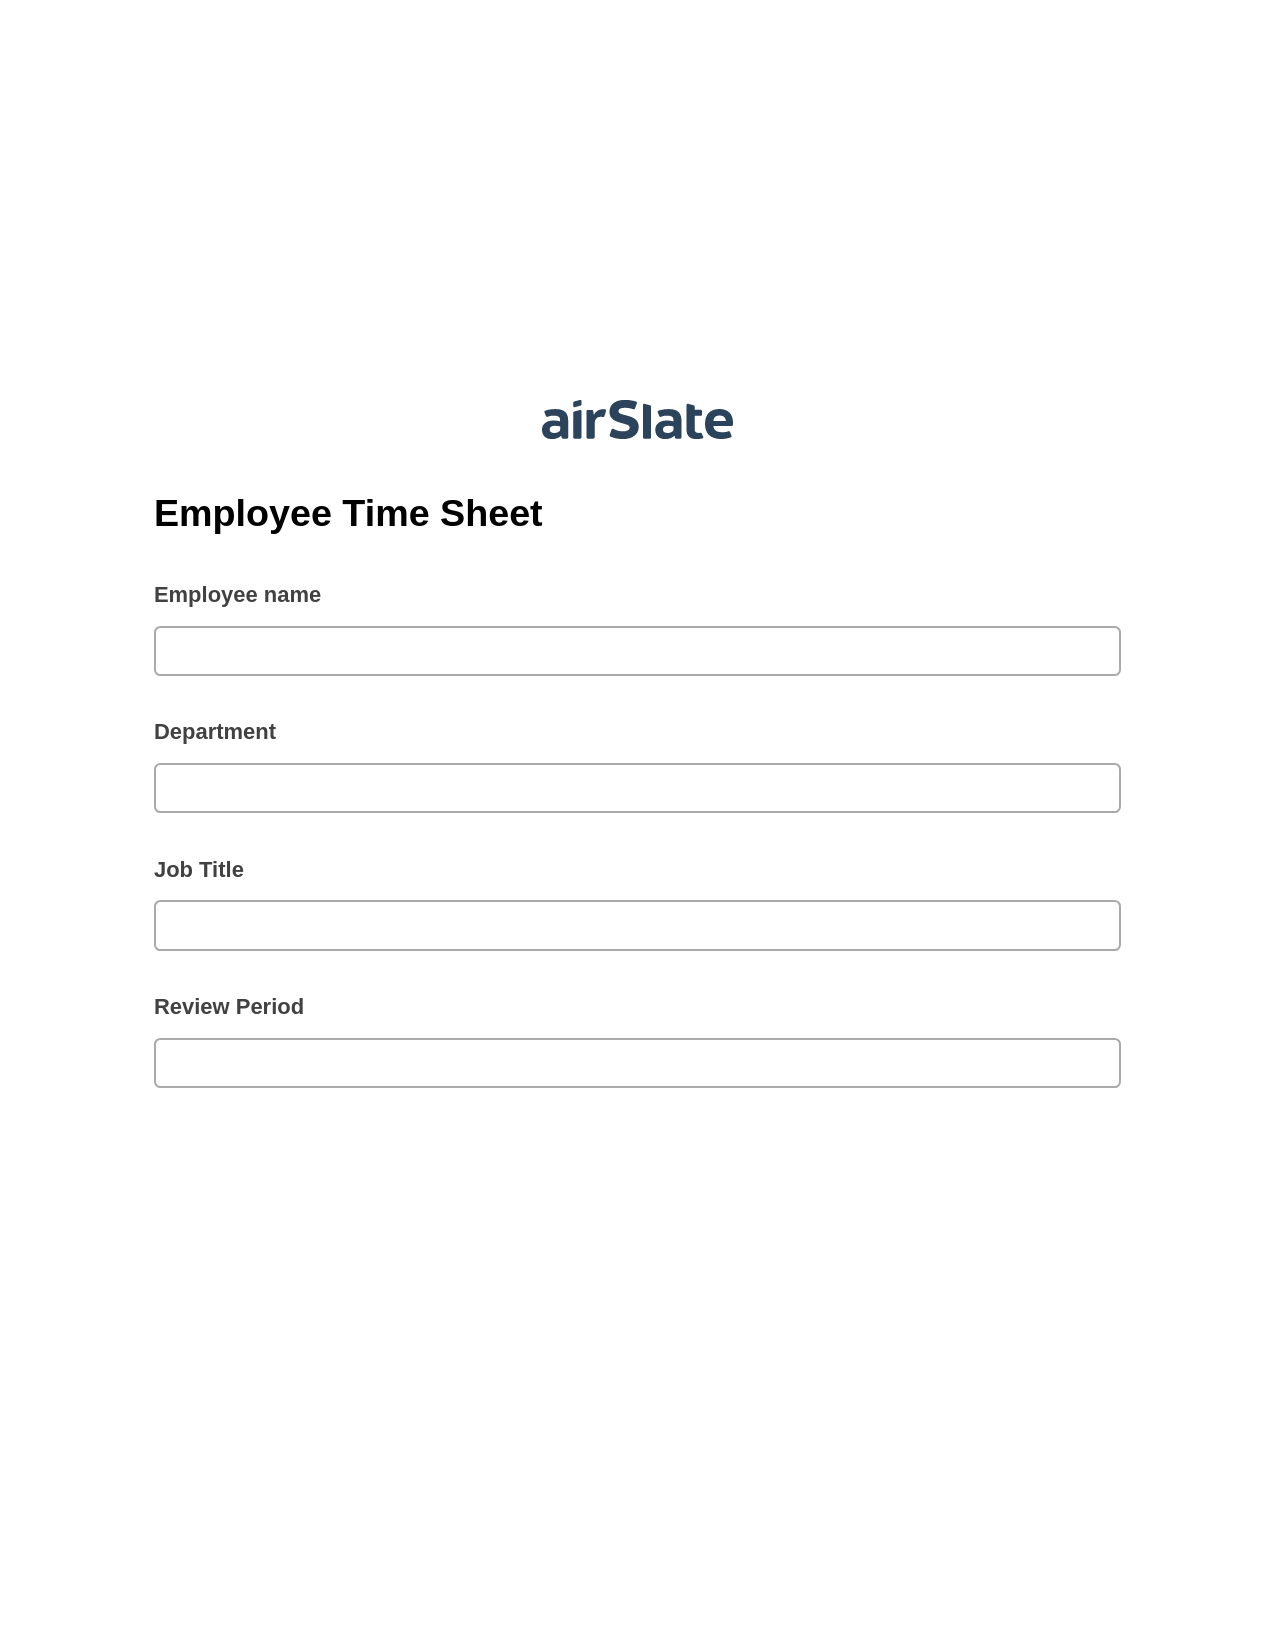 Multirole Employee Time Sheet Prefill from NetSuite records, Update Audit Trail Bot, Archive to SharePoint Folder Bot